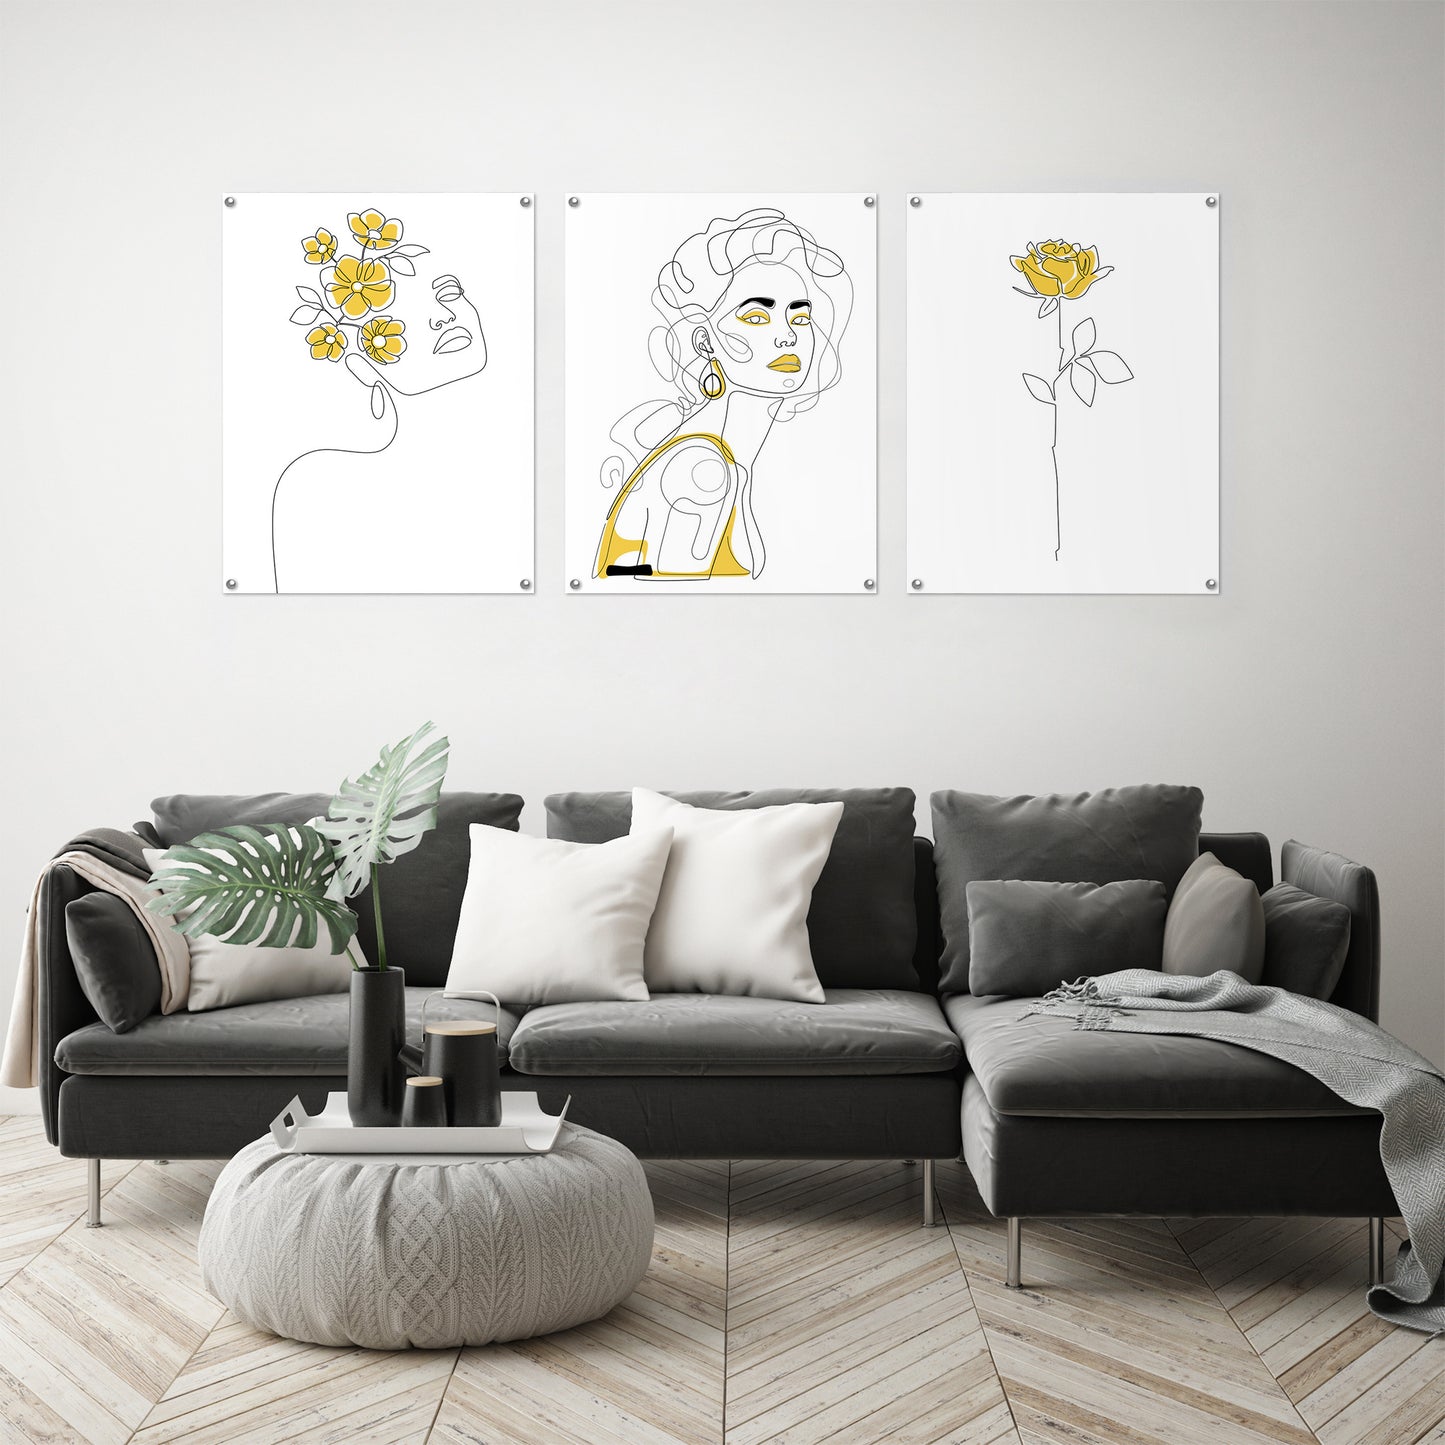 (Set of 3) Triptych Wall Art Yellow Female Line Art by Explicit Design - Poster Print